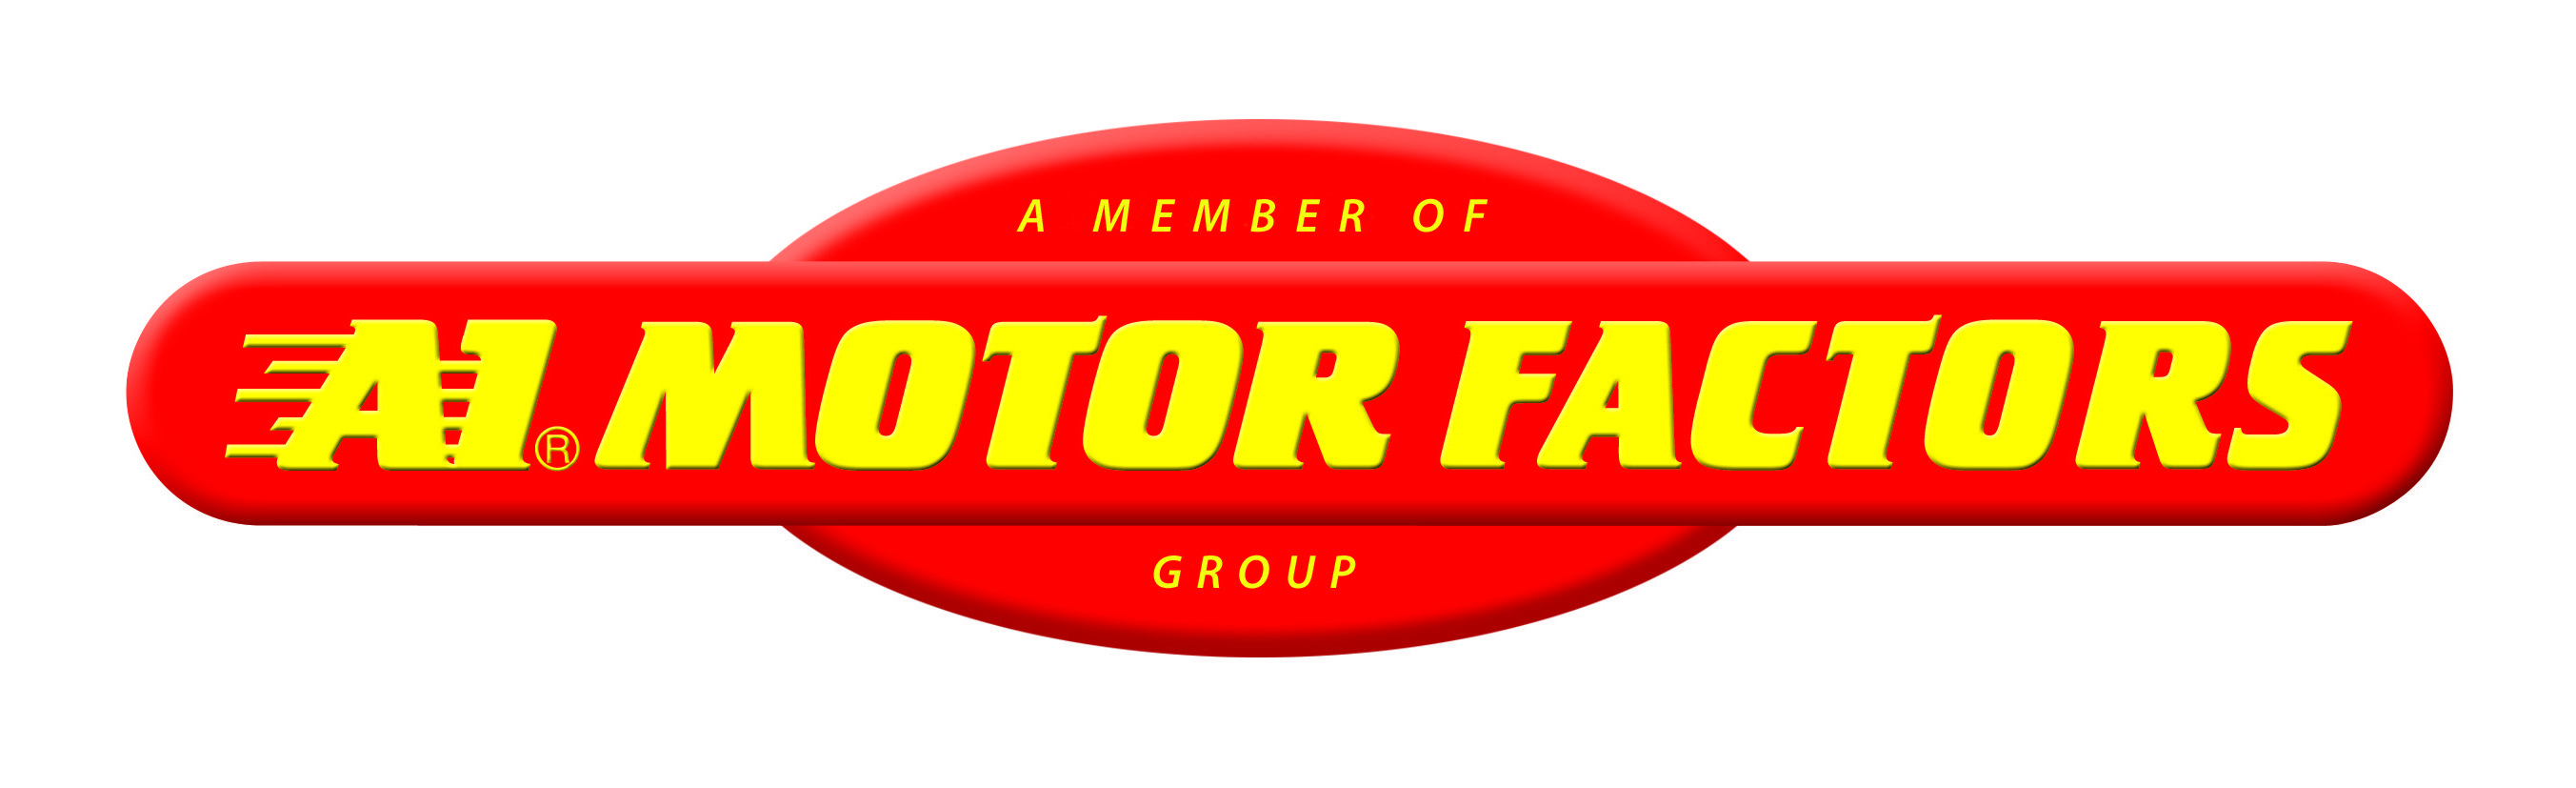 gt automotive approved a1 motor factor supplier logo